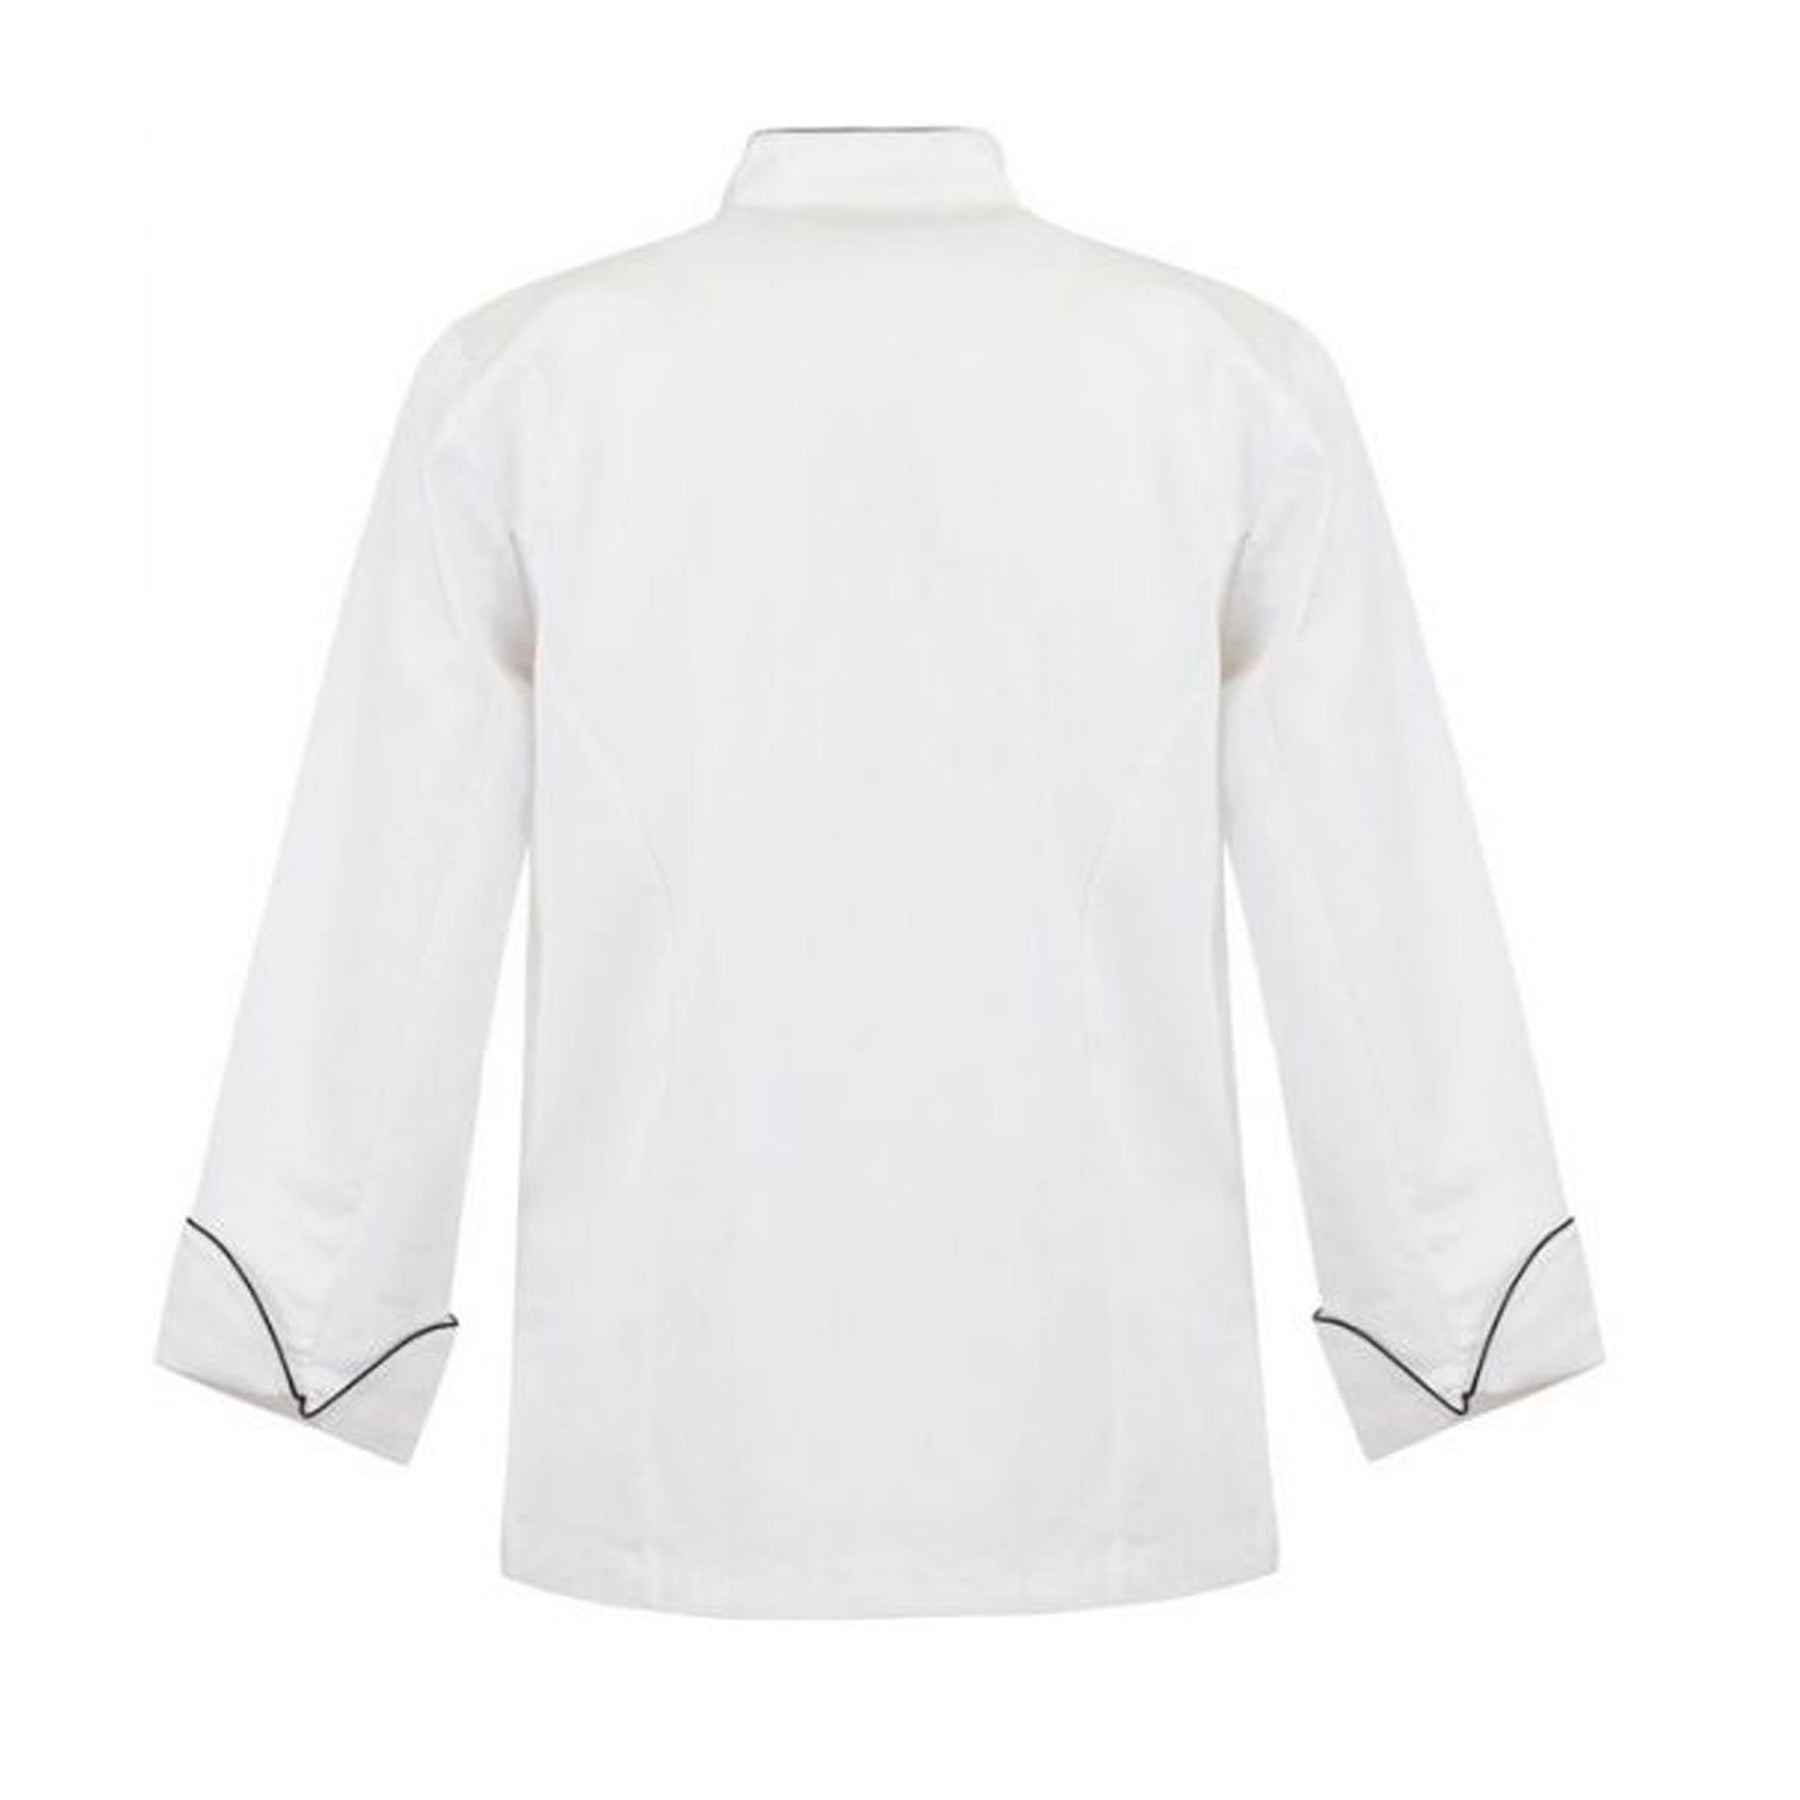 white long sleeve executive chefs jacket with piping back view